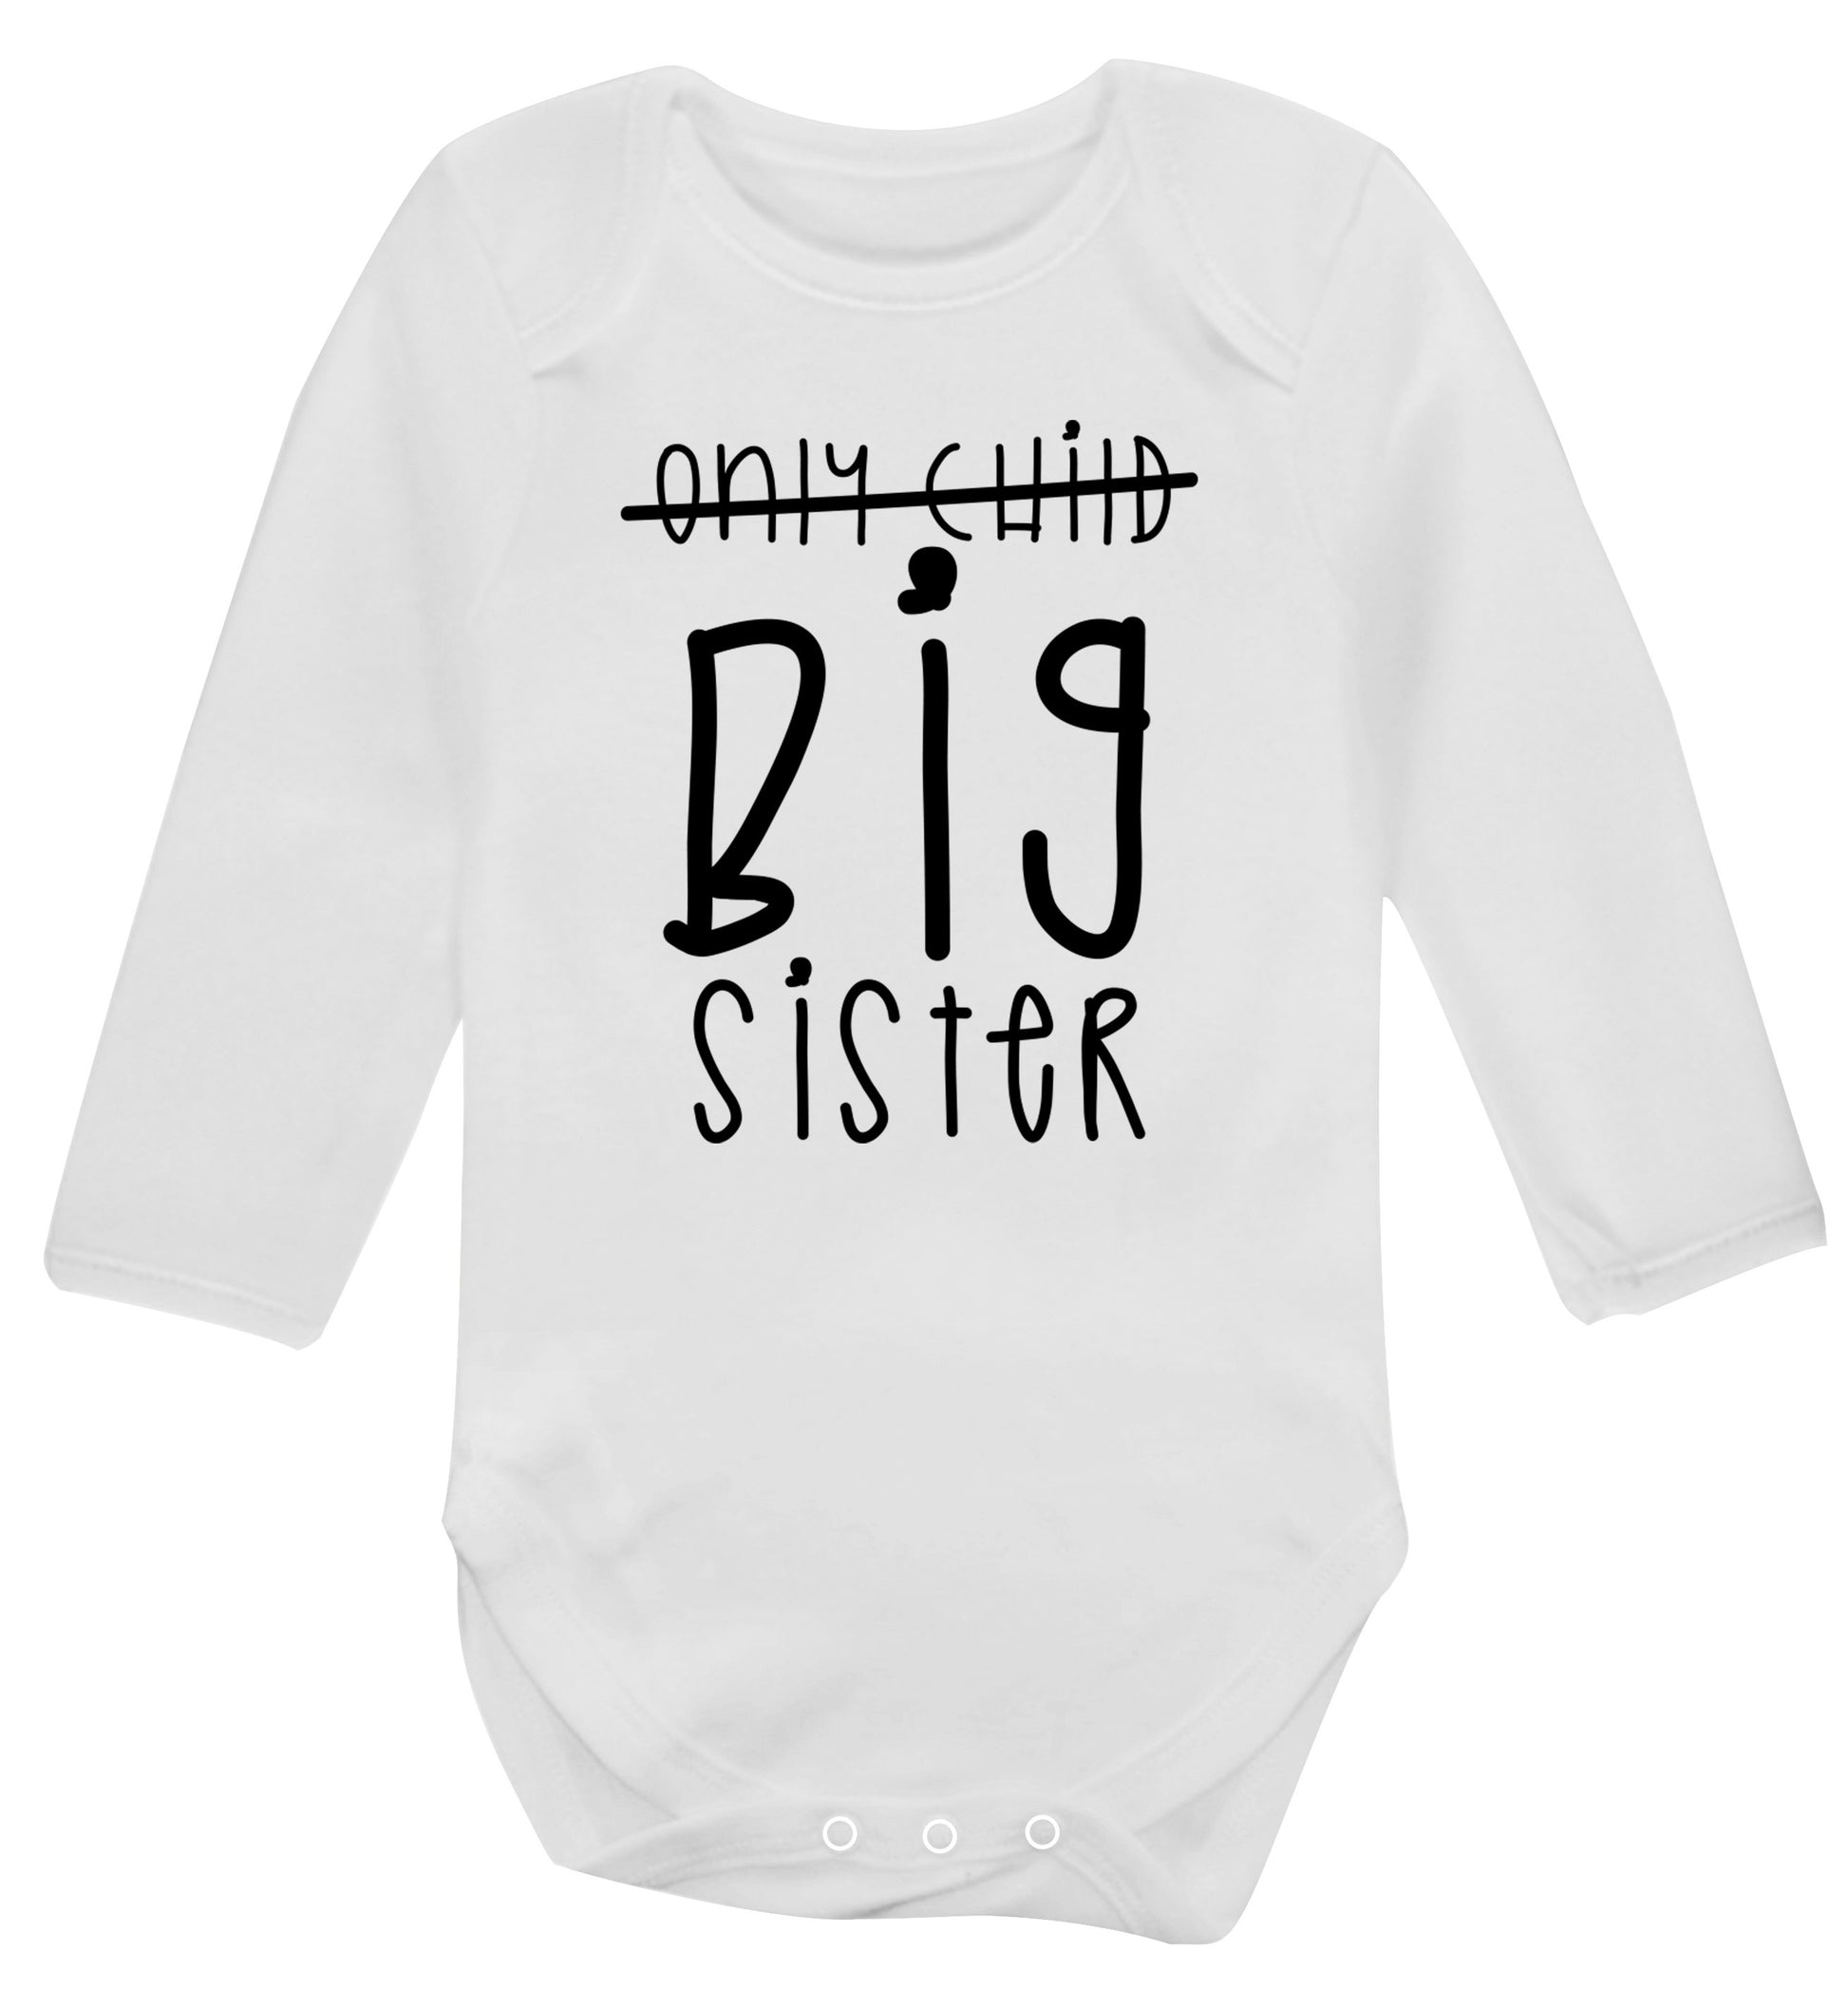 Only child big sister Baby Vest long sleeved white 6-12 months